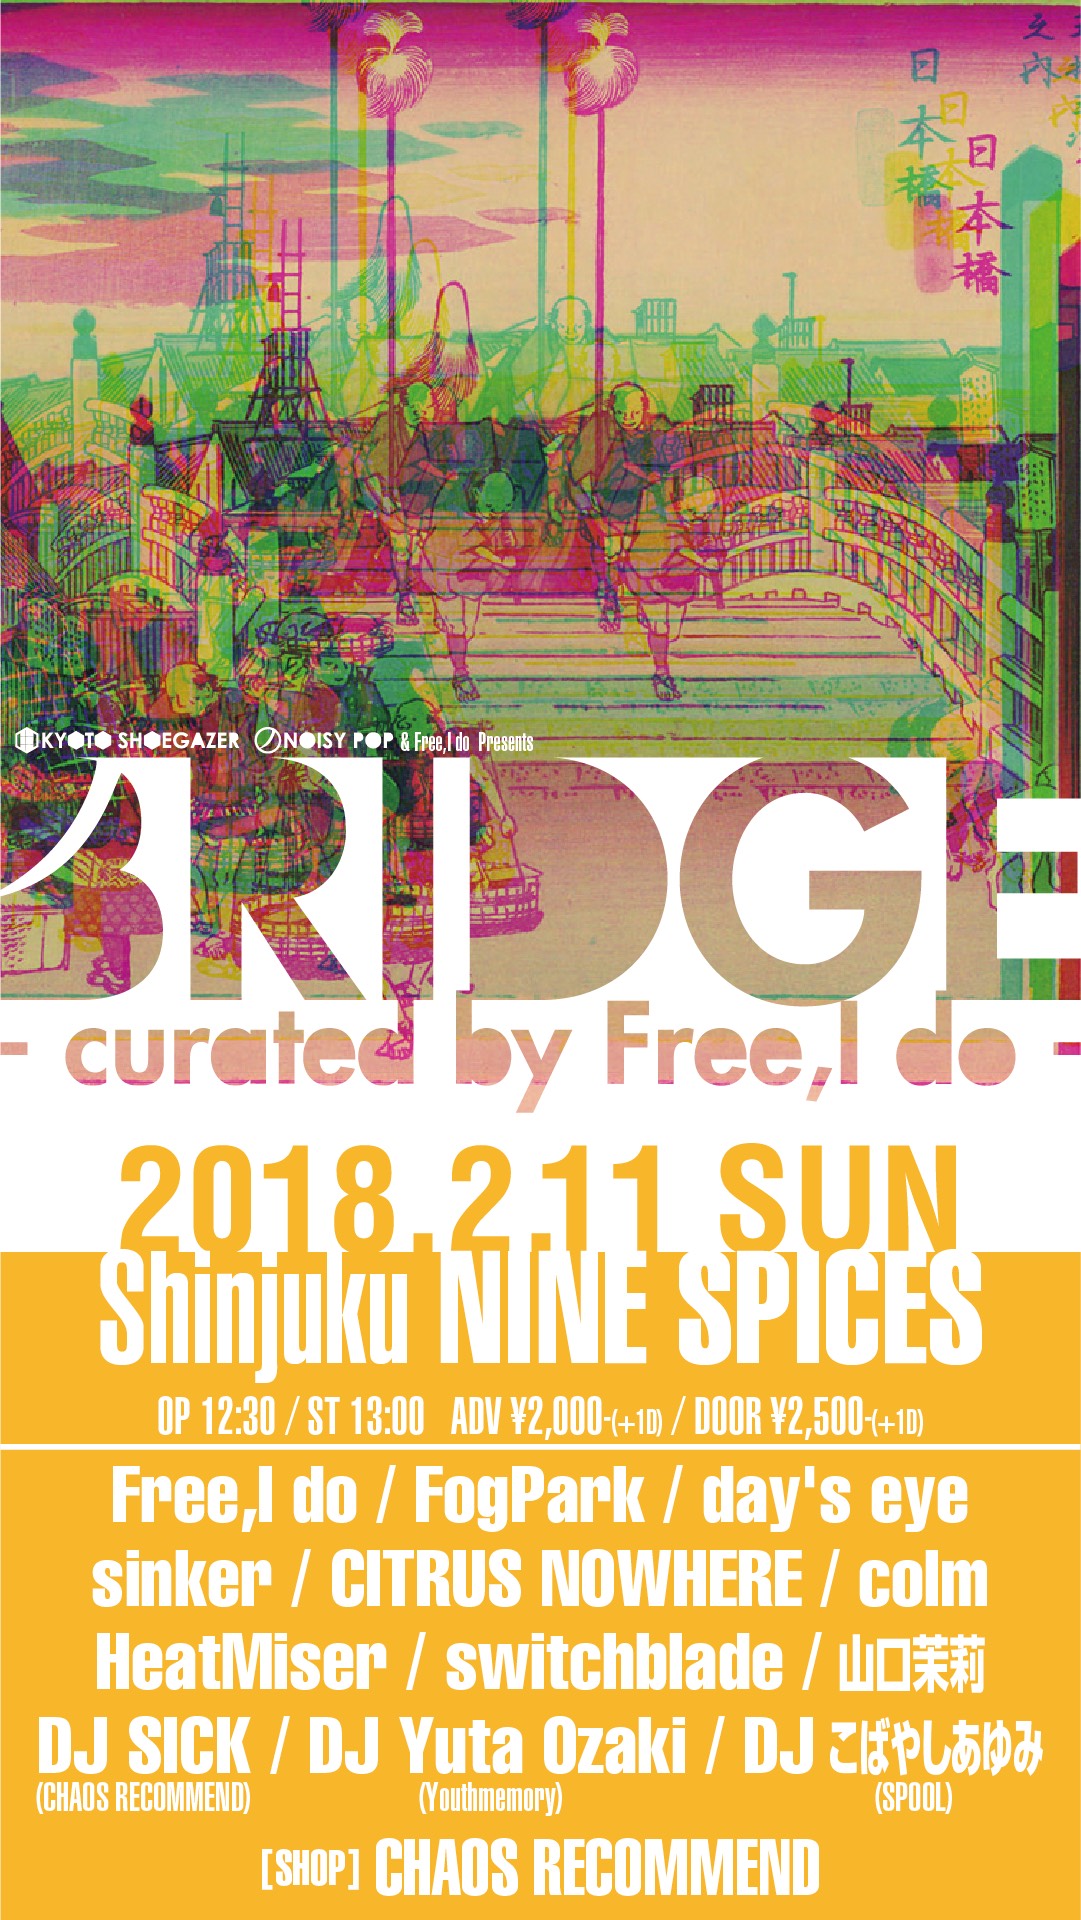 「BRIDGE – curated by Free,I do」